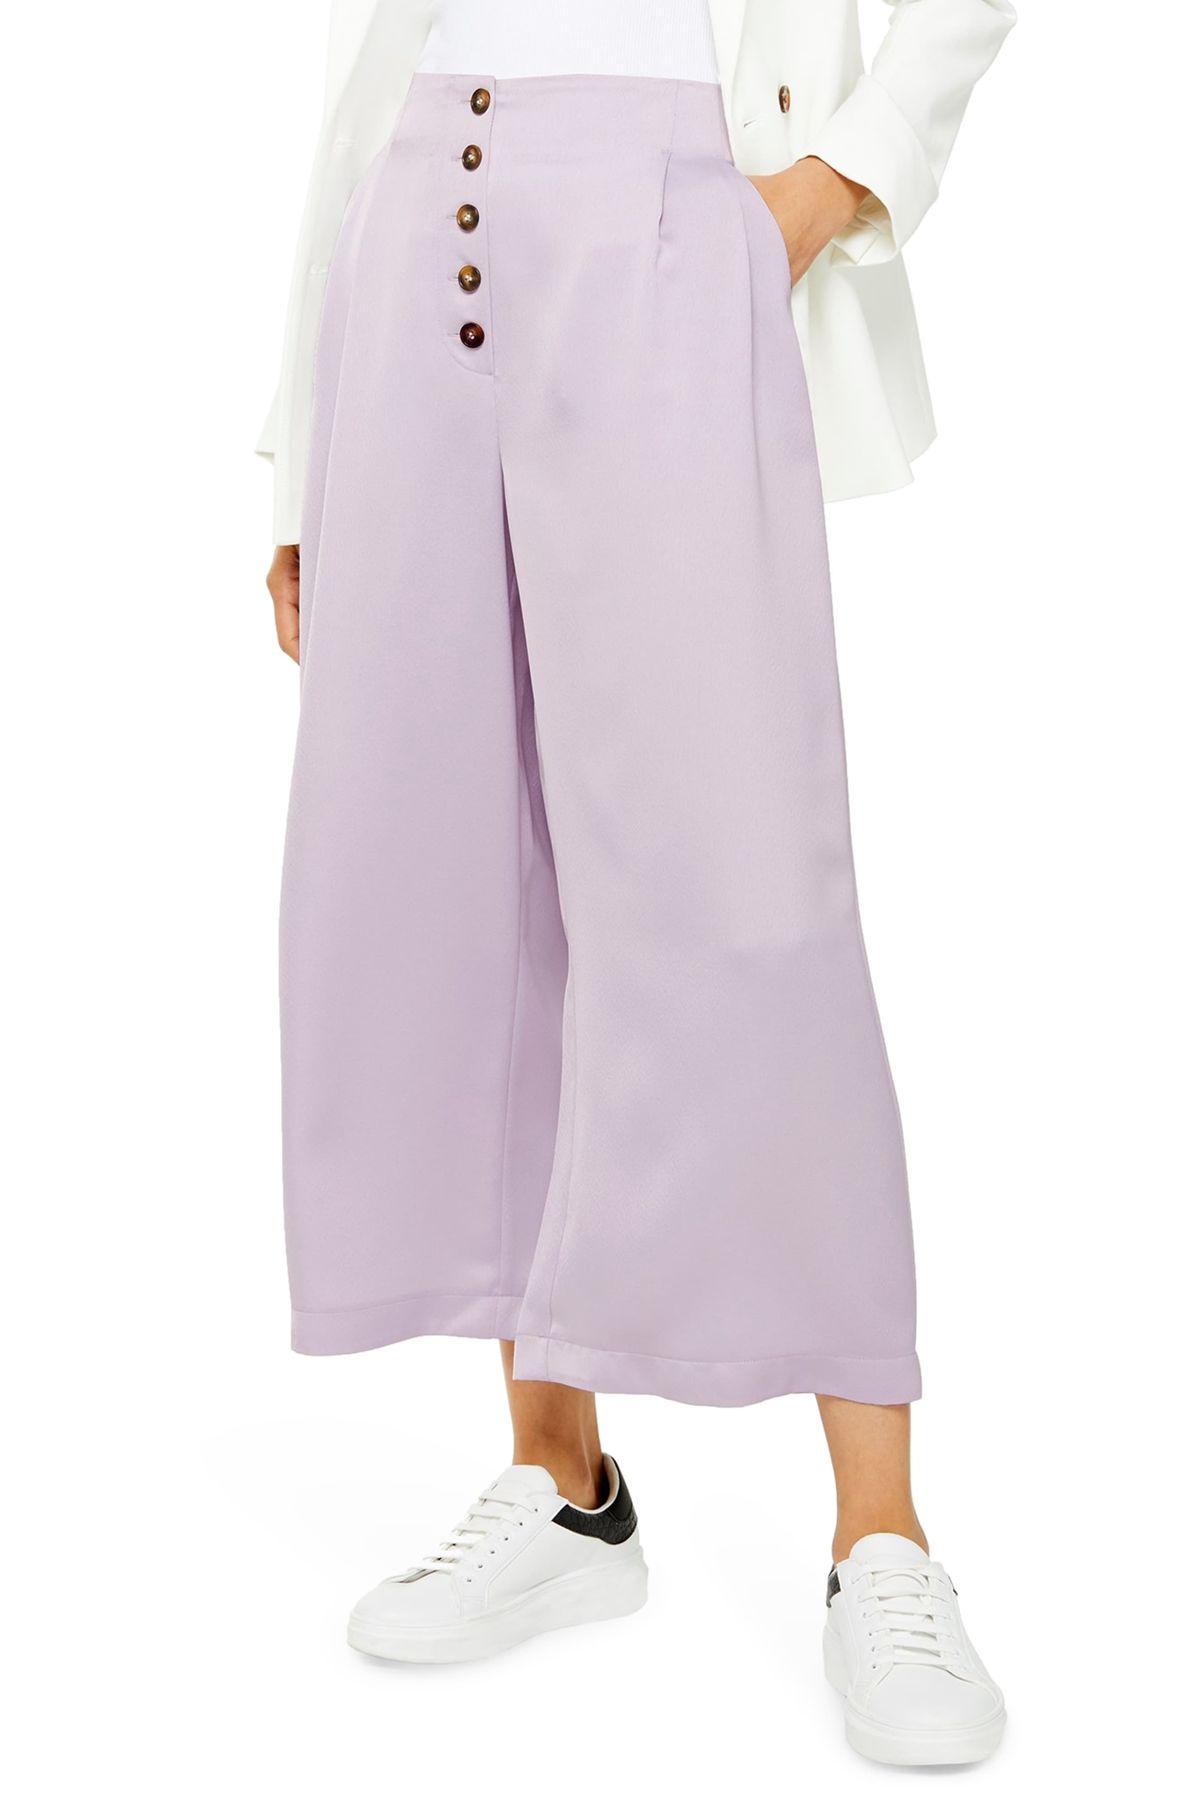 TOPSHOP Coco Satin Wide Leg Crop Trousers in Lilac (Purple) - Lyst